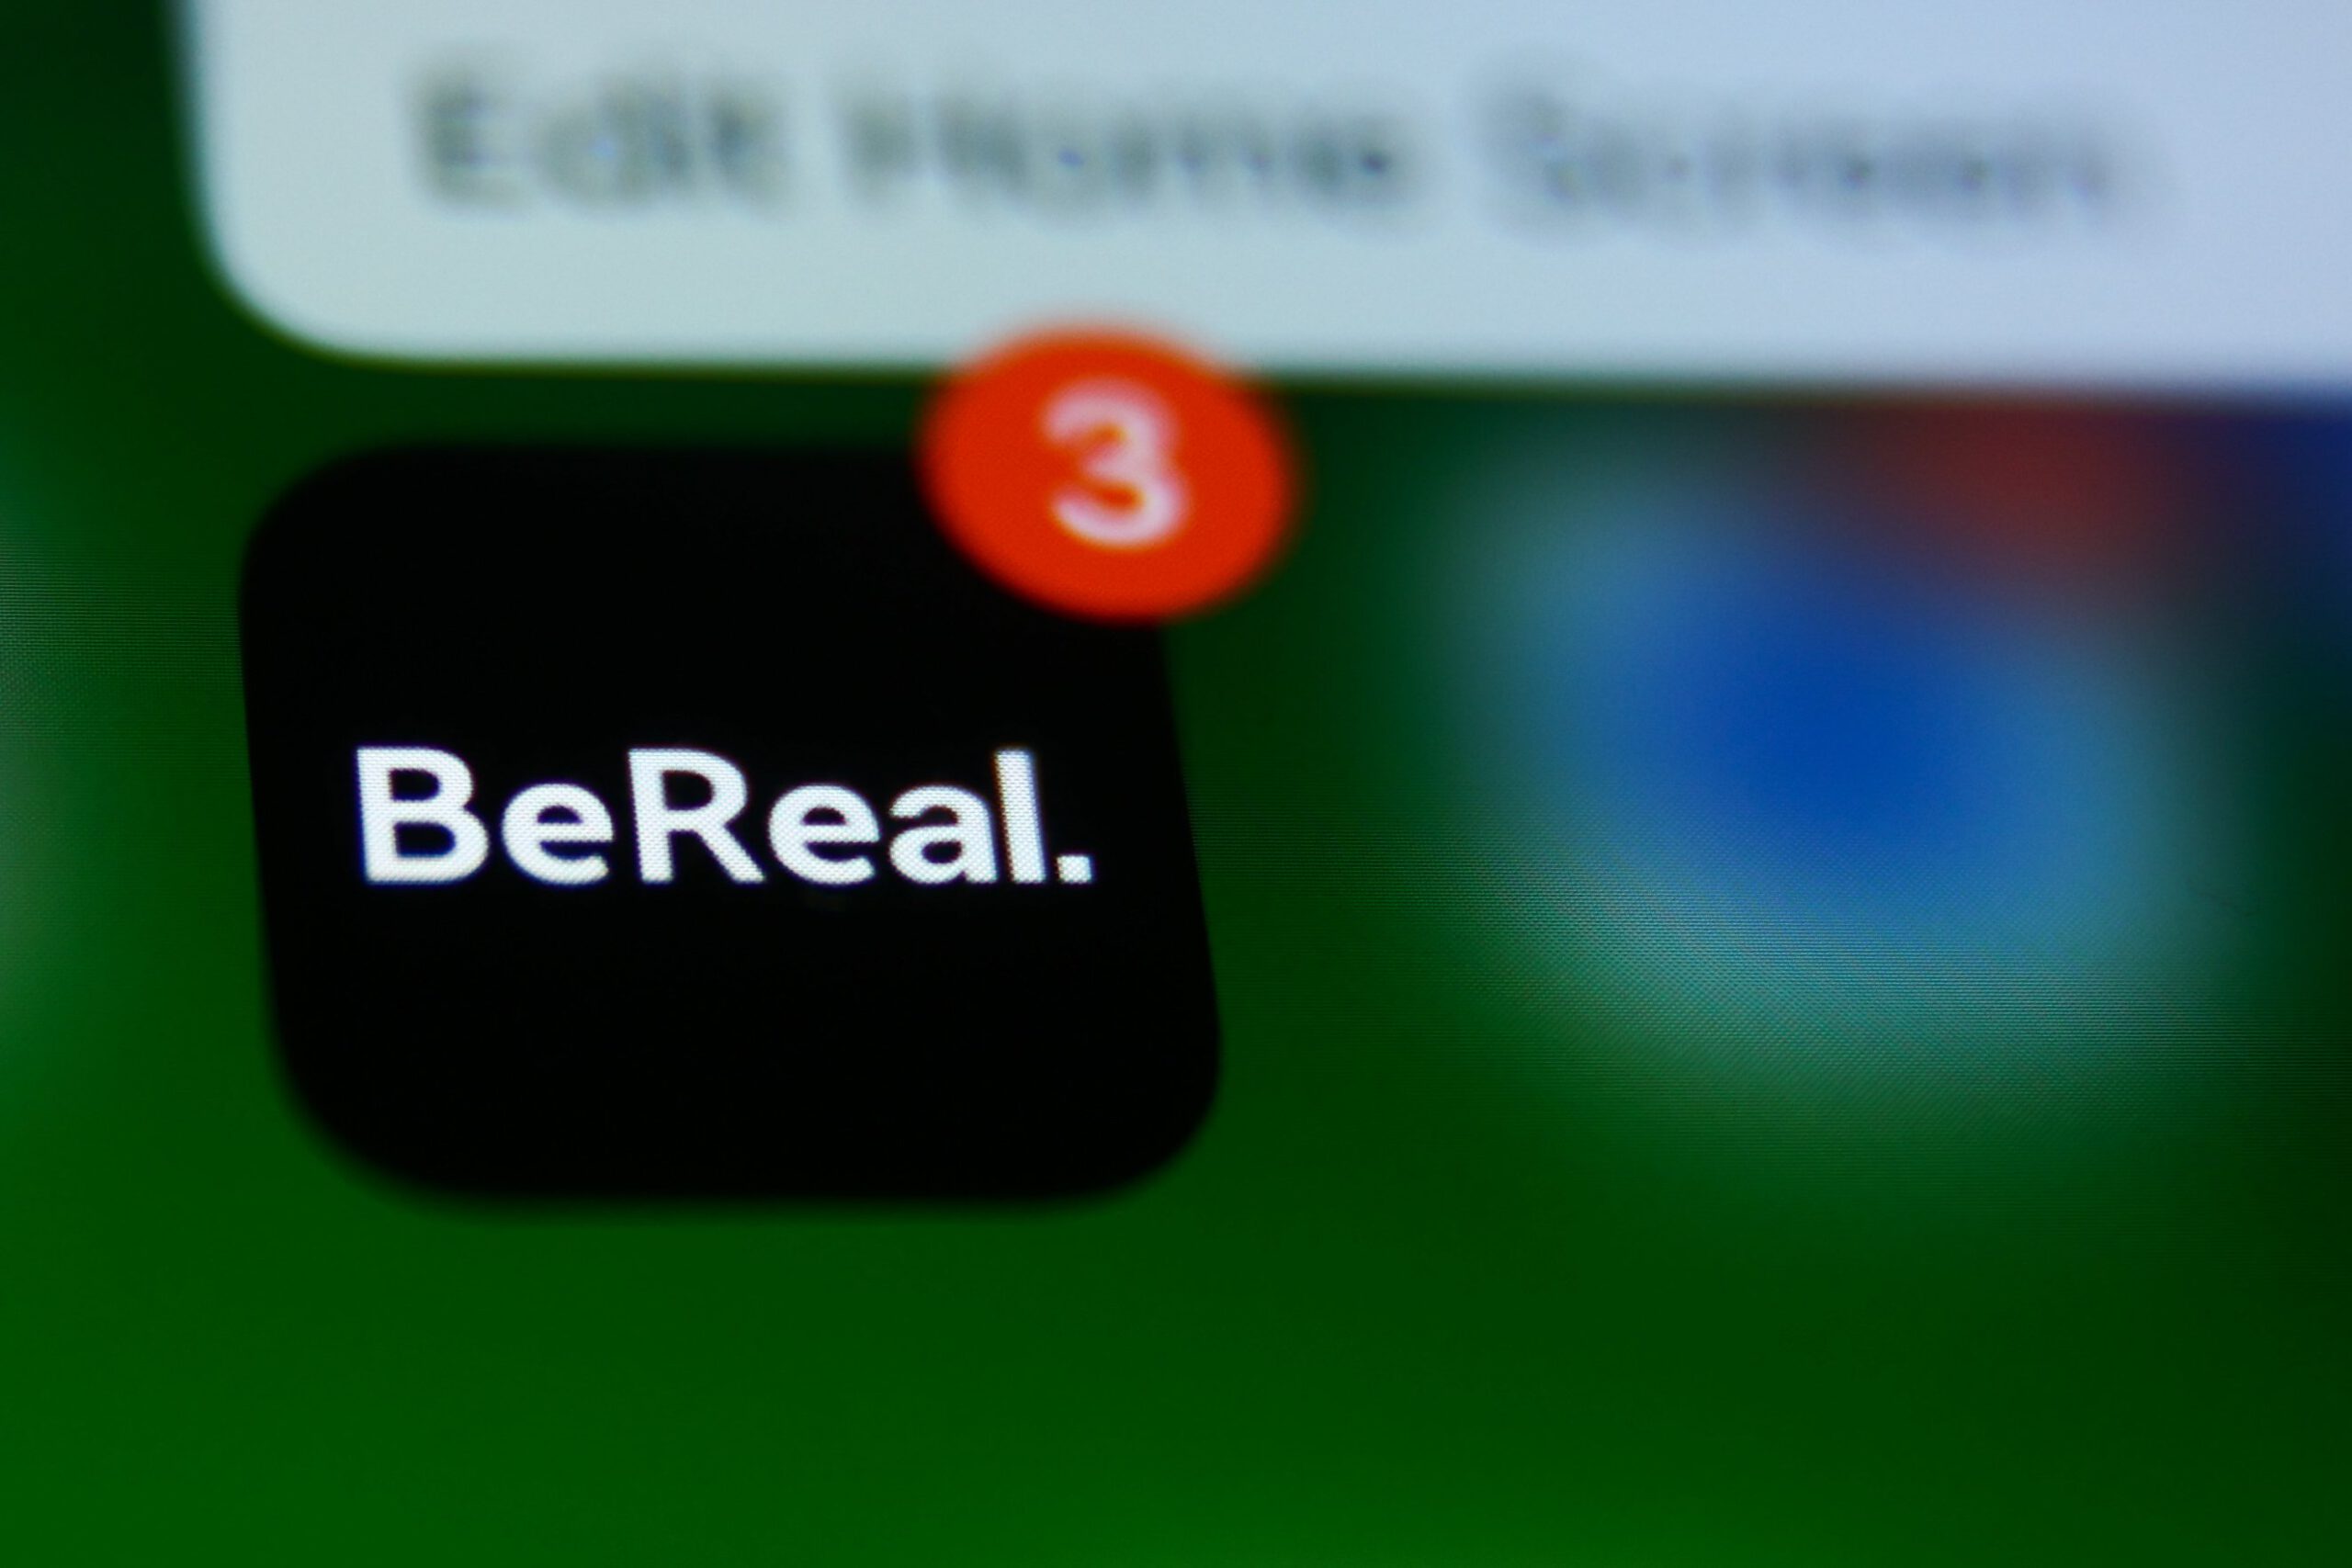 BeReal icon displayed on a phone screen